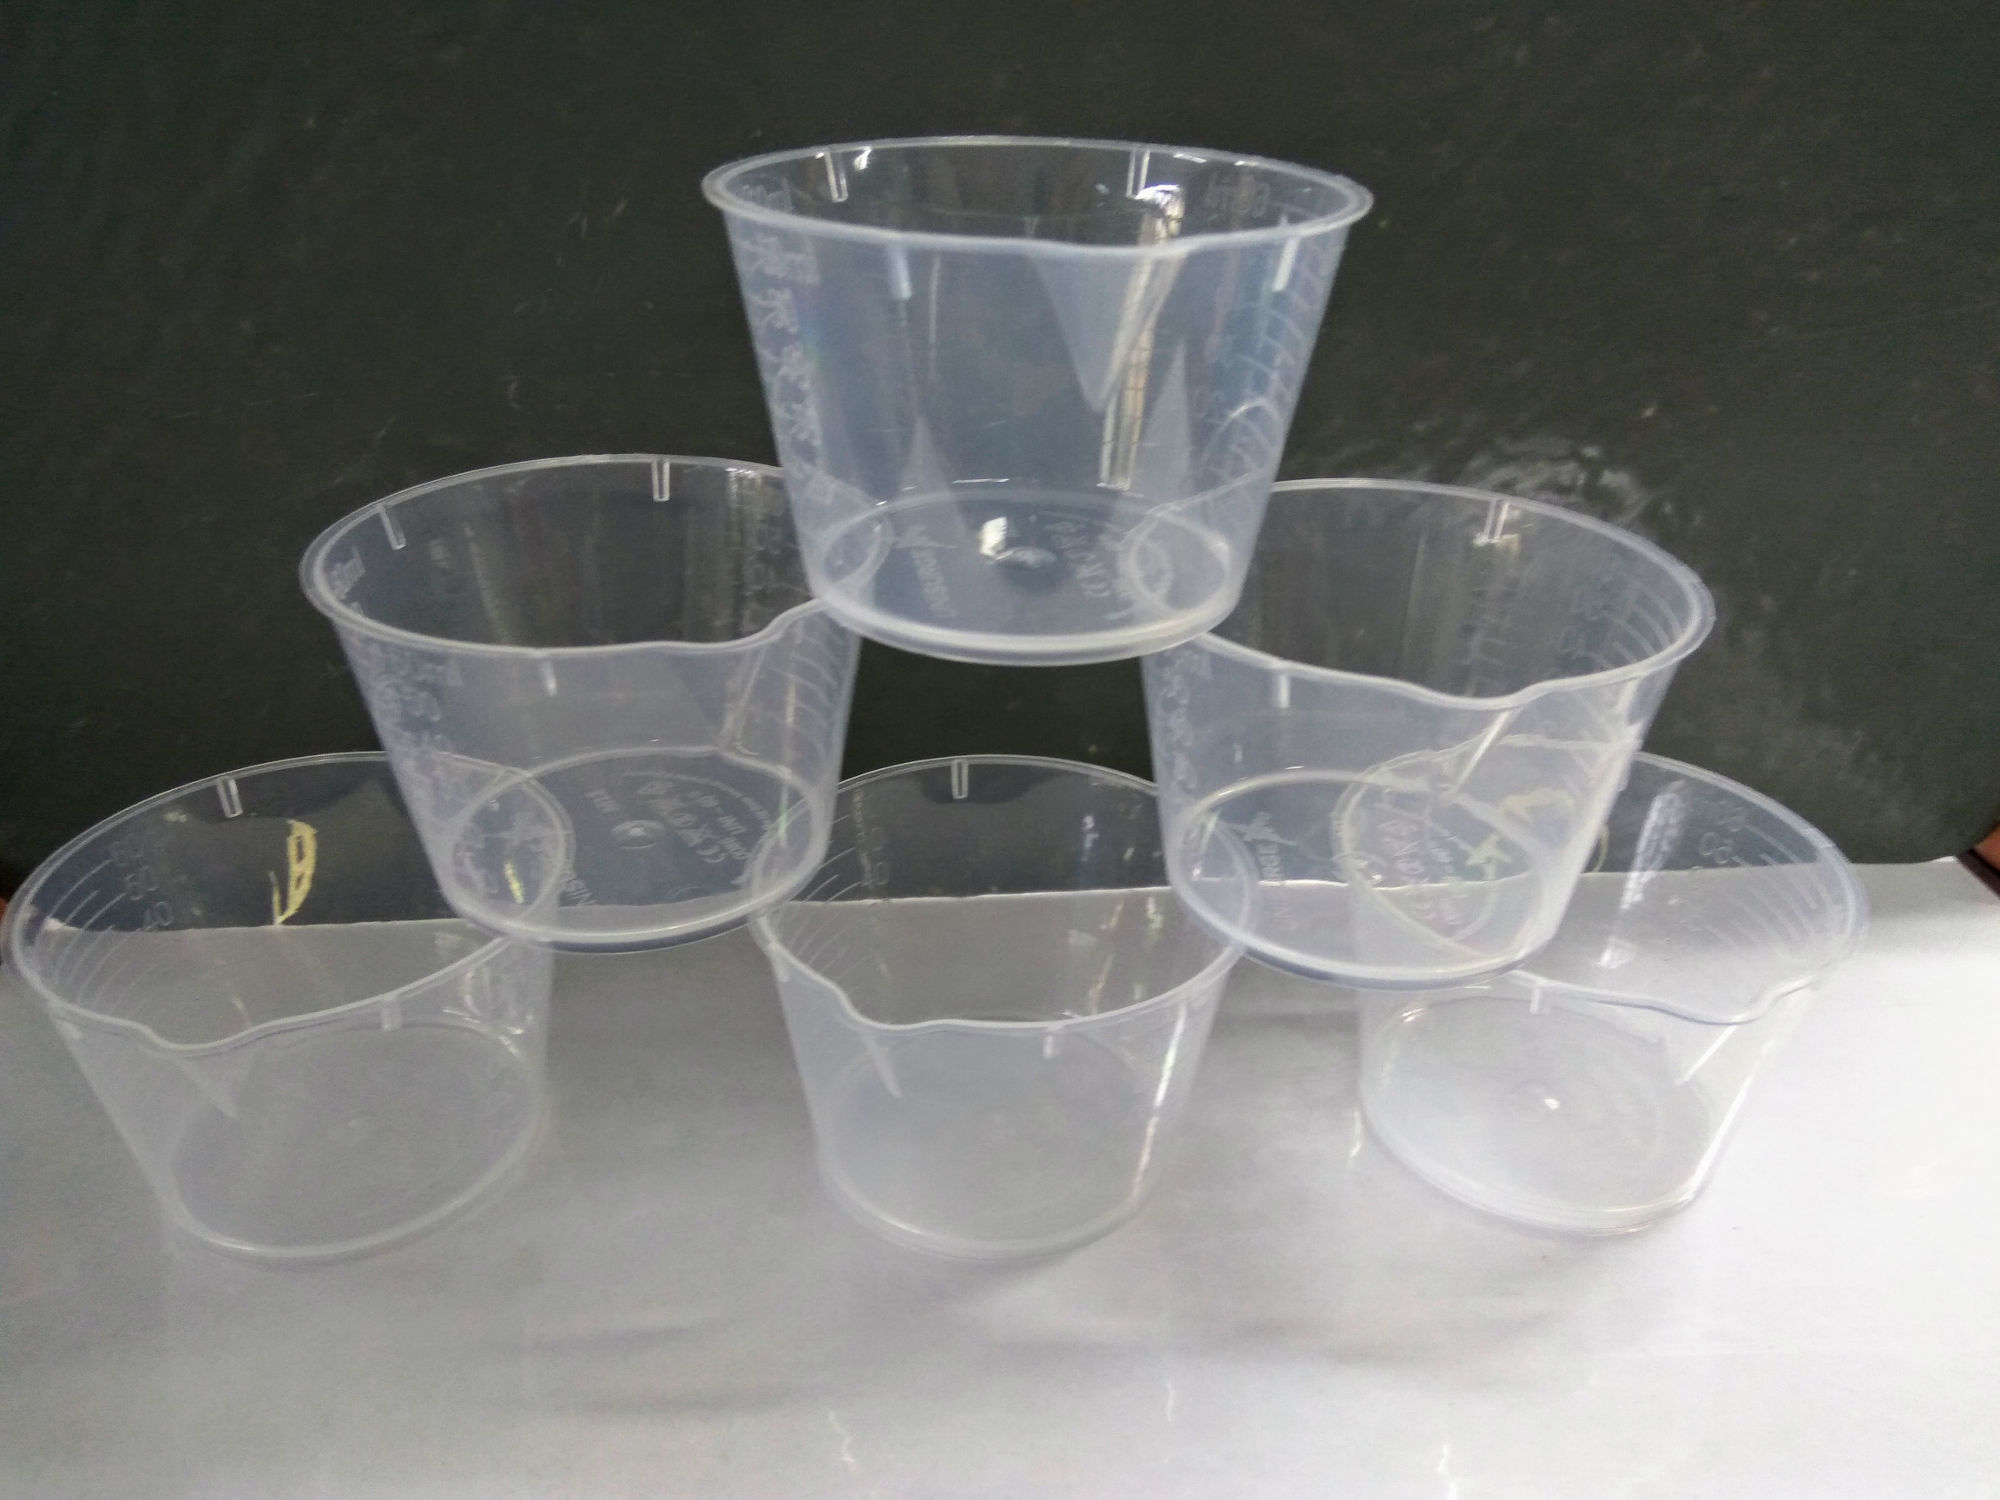 60ml Plastic Cup with Spout (single)